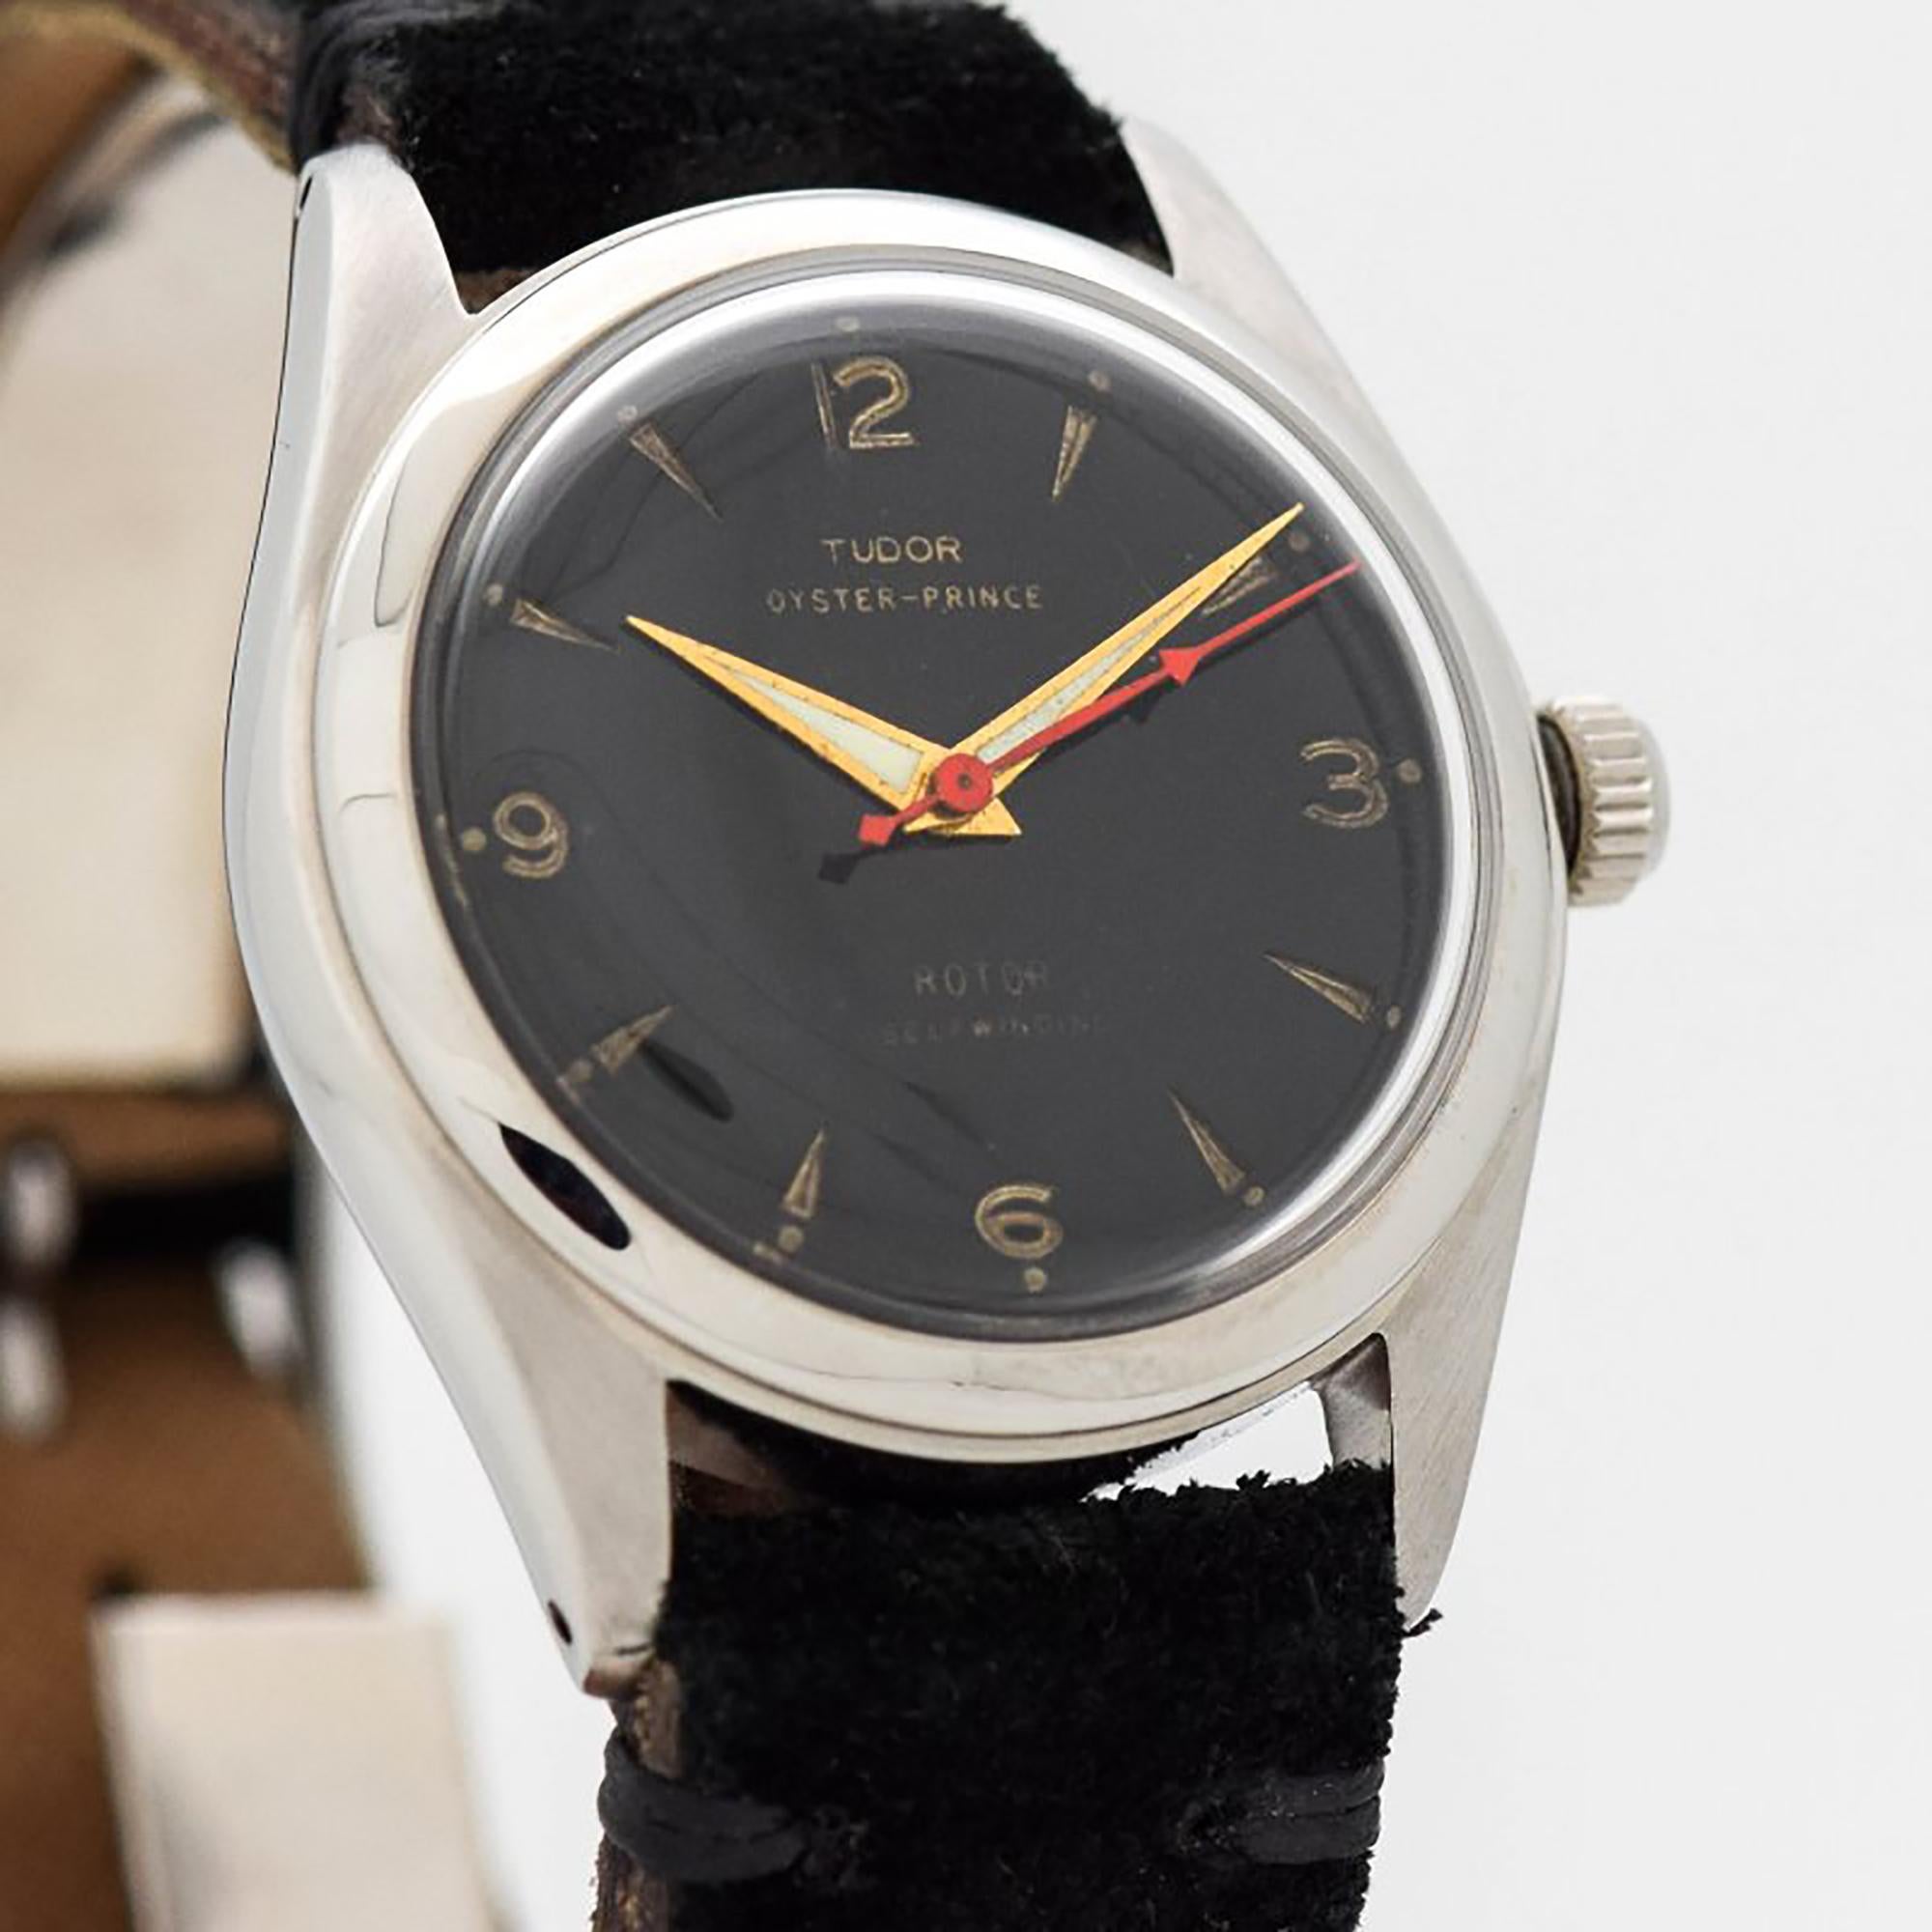 1953 Vintage Tudor Prince Ref. 7809 Stainless Steel watch with Rare Original Black Dial with Raised/Embossed Gold Color Arabic 3, 6, 9 & 12 with Elongated Arrow Markers. 34mm x 39mm lug to lug (1.34 in. x 1.54 in.) - Powered by a 17-jewel, automatic